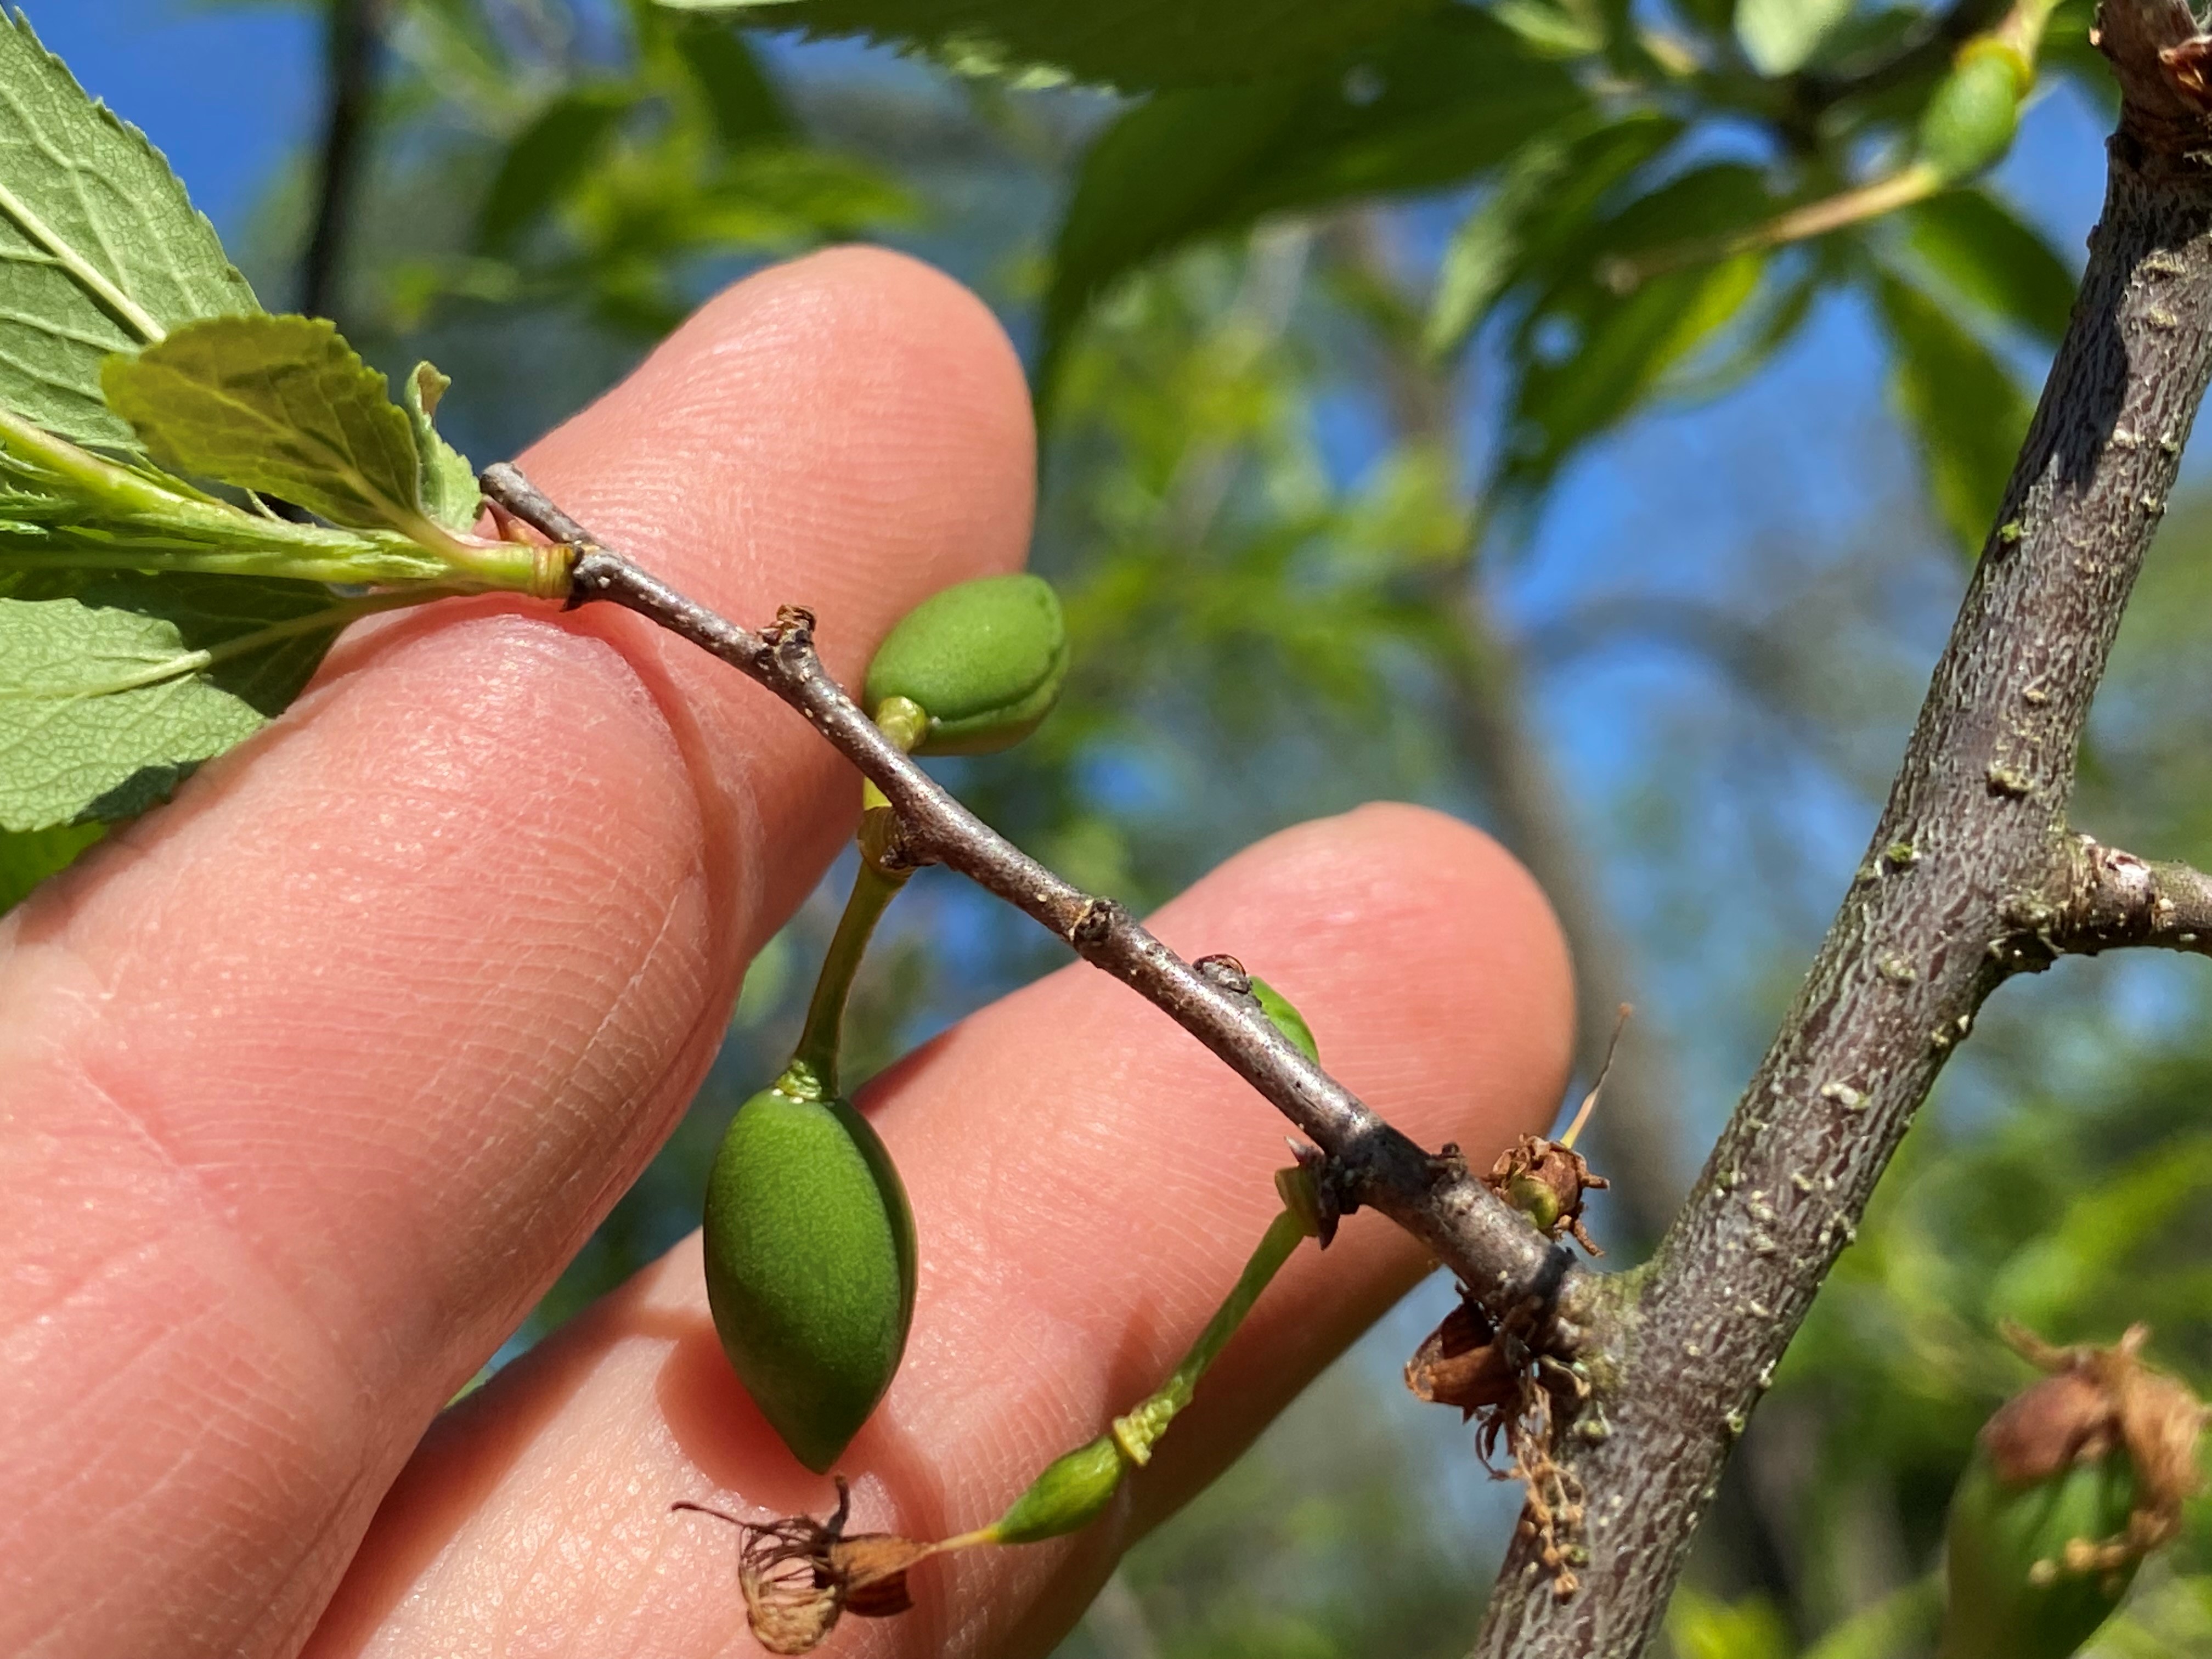 Two fingers lay behind two tiny native plum fruits, showing them off for the camera. The sky is blue in the background and the plums are still attached to their tree.